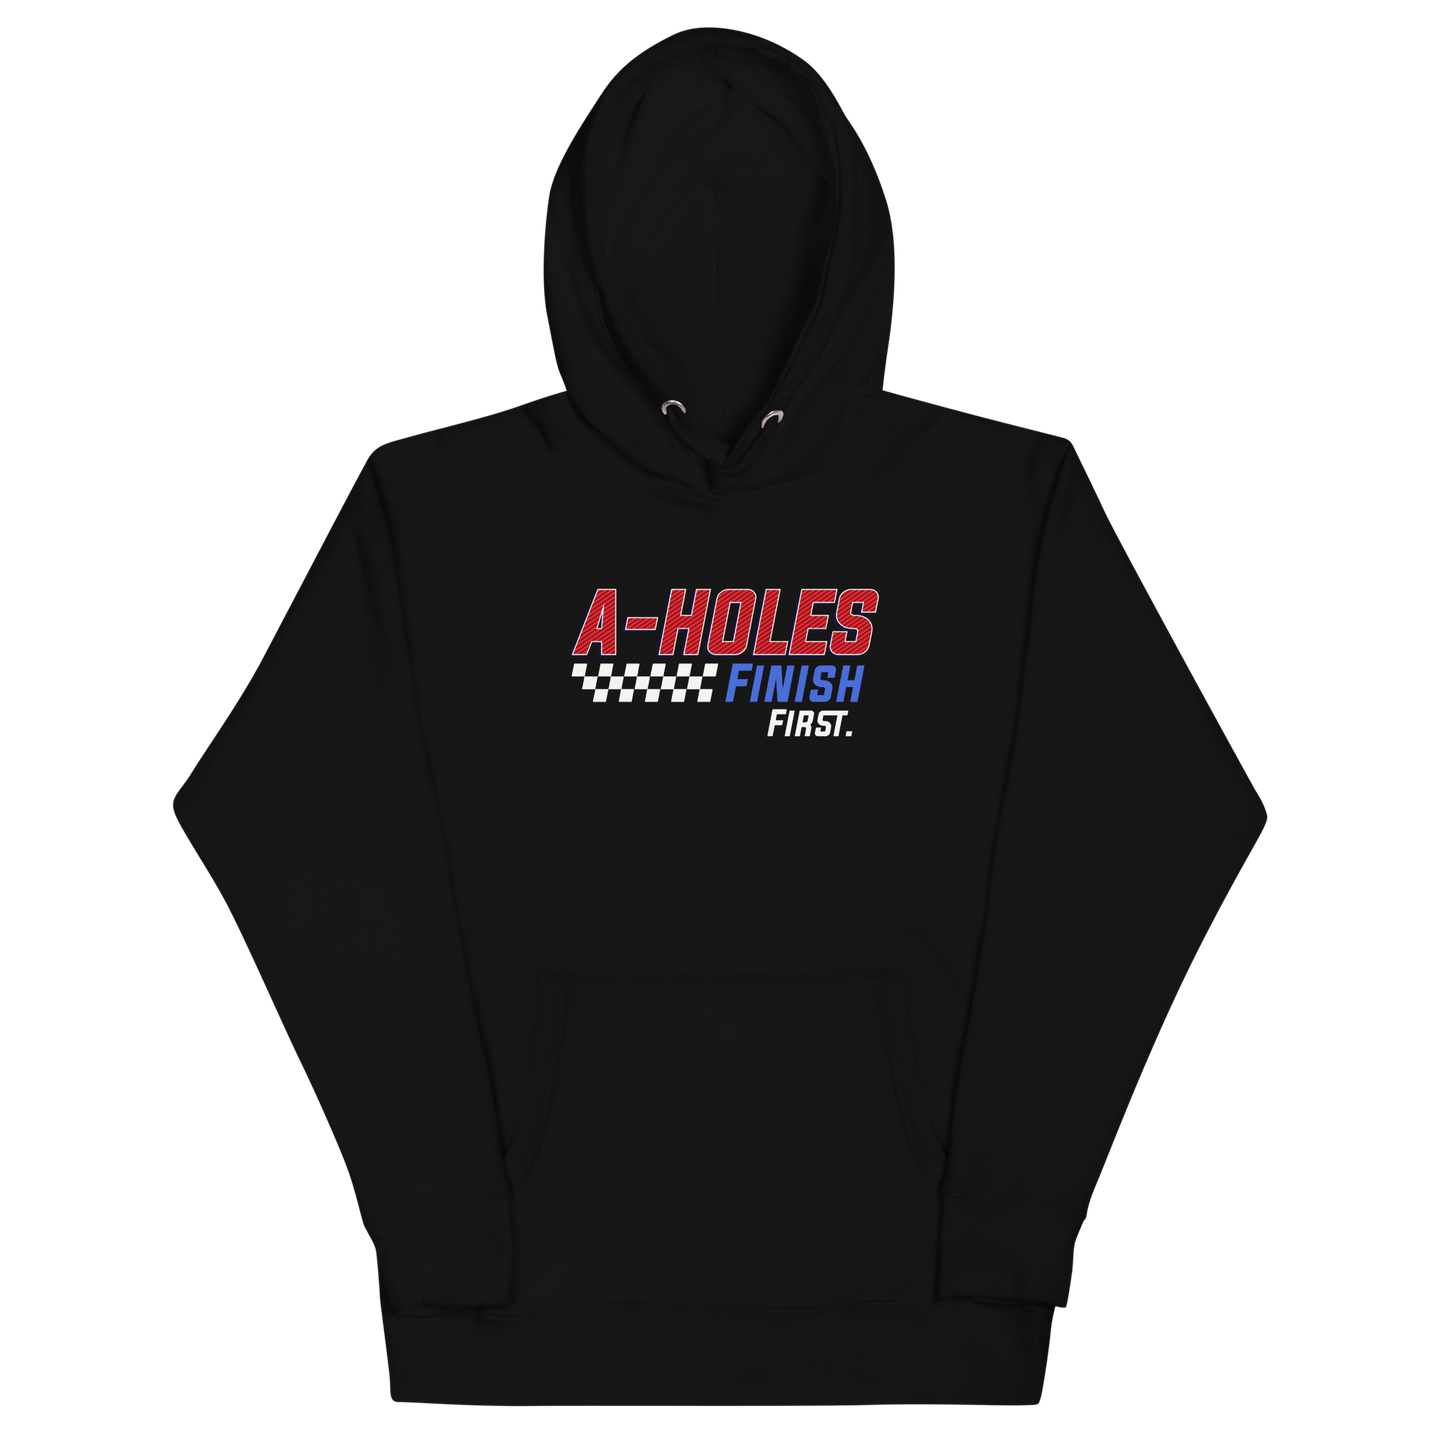 A-Hole "First Place" Unisex Hoodie